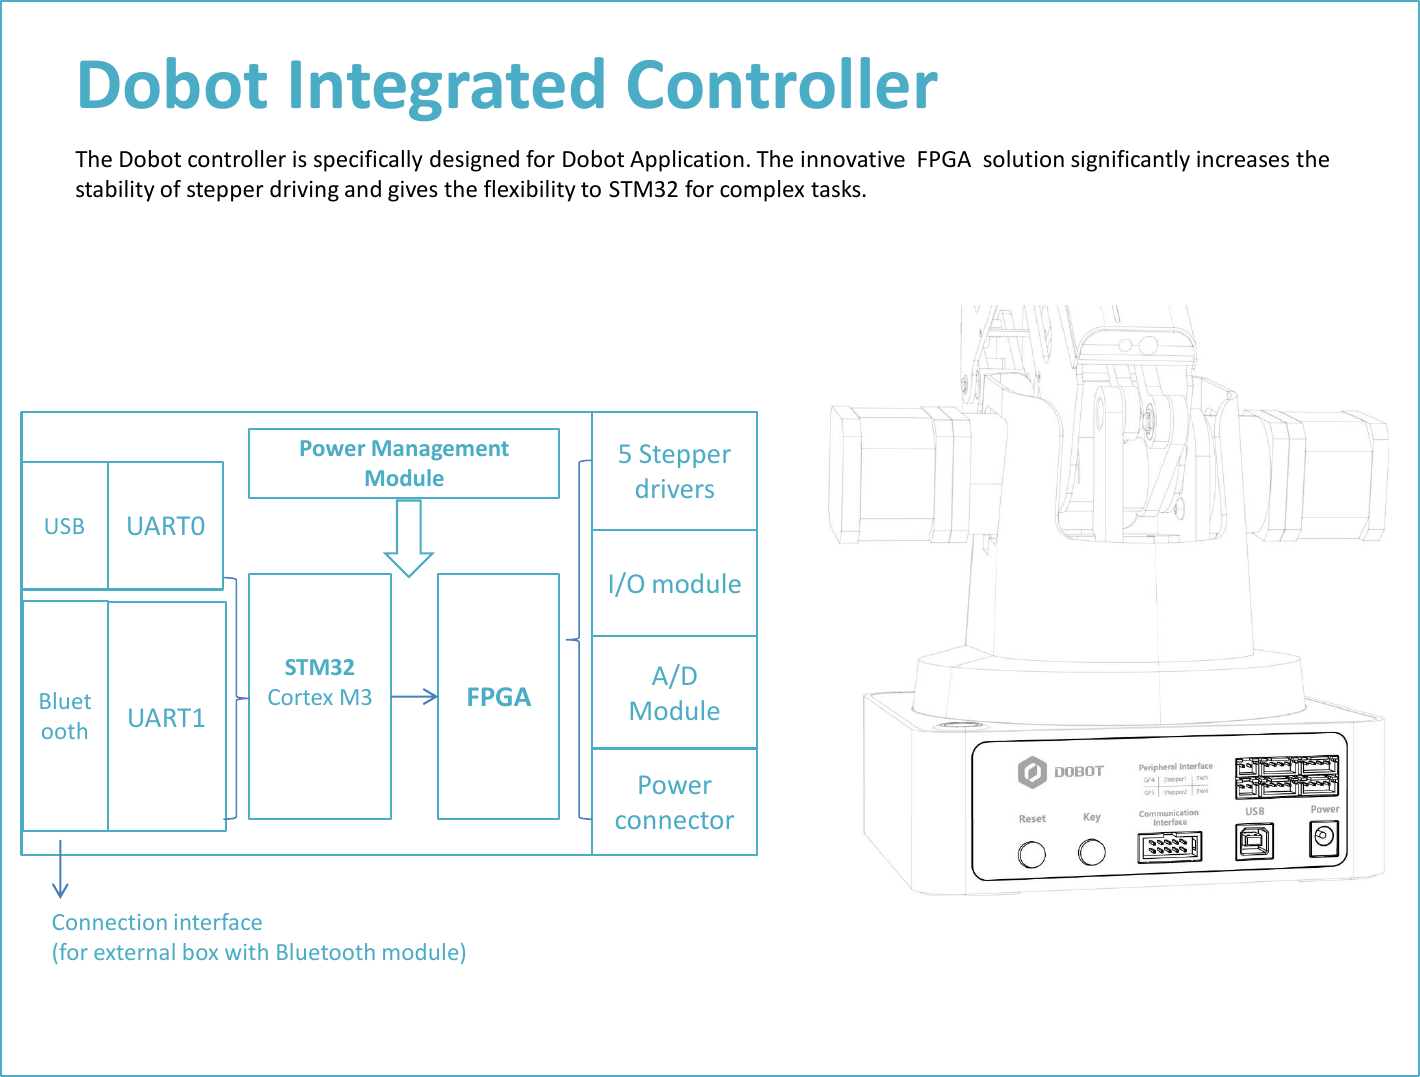 Dobot Integrated Controller The Dobot controller is specifically designed for Dobot Application. The innovative  FPGA  solution significantly increases the stability of stepper driving and gives the flexibility to STM32 for complex tasks.  Power Management Module STM32 Cortex M3   FPGA 5 Stepper drivers UART0 I/O module A/D Module Power connector UART1 USB Bluetooth Connection interface (for external box with Bluetooth module) 